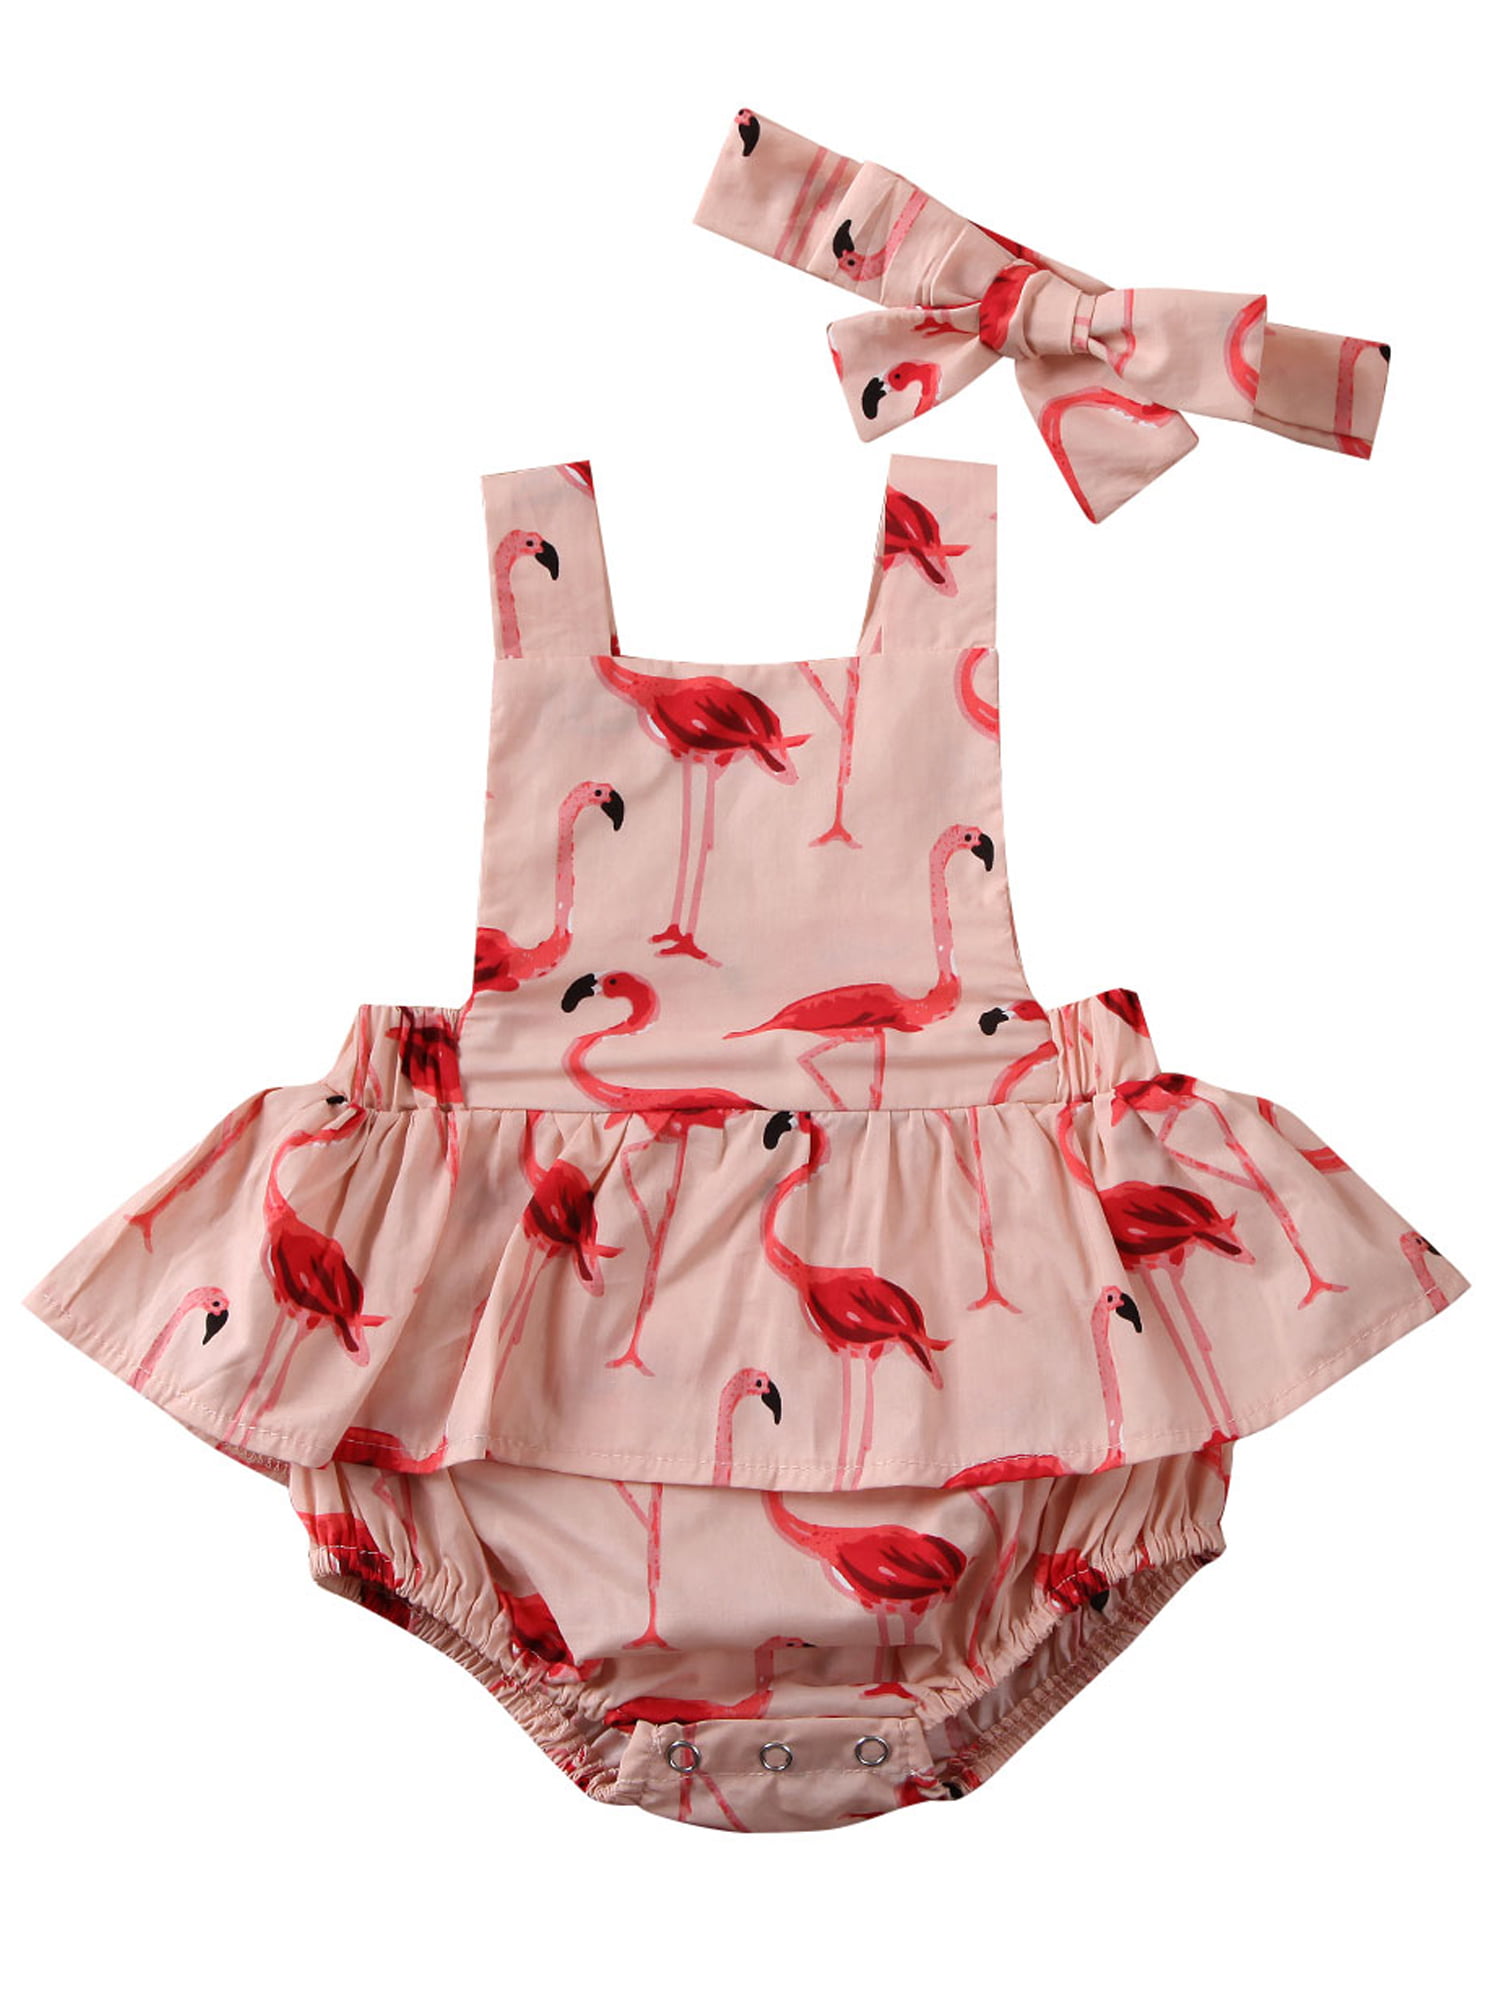 Baby Girl Long Sleeve Pink Ruffle Romper Flamingo Printing Pants with Headband Outfit Set